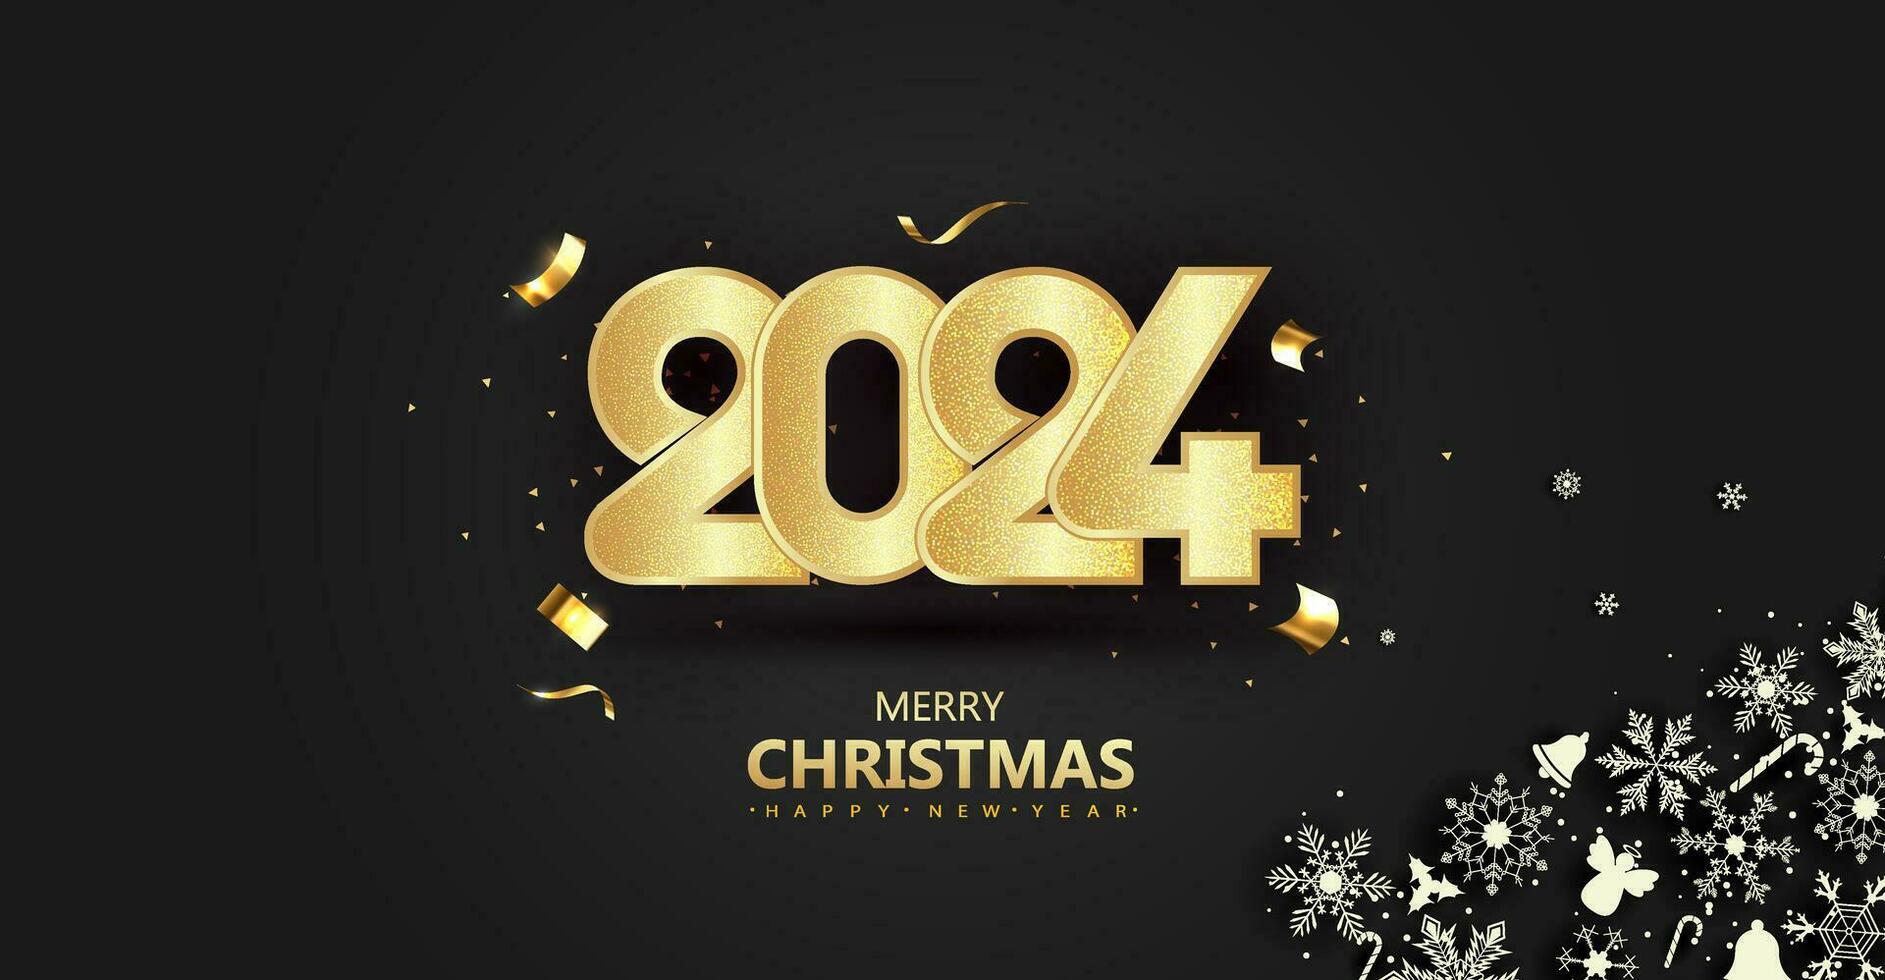 Happy new year 2024 . With shiny numbers with dark black shadows. Premium vector design for banners, posters, newsletters and other purposes.